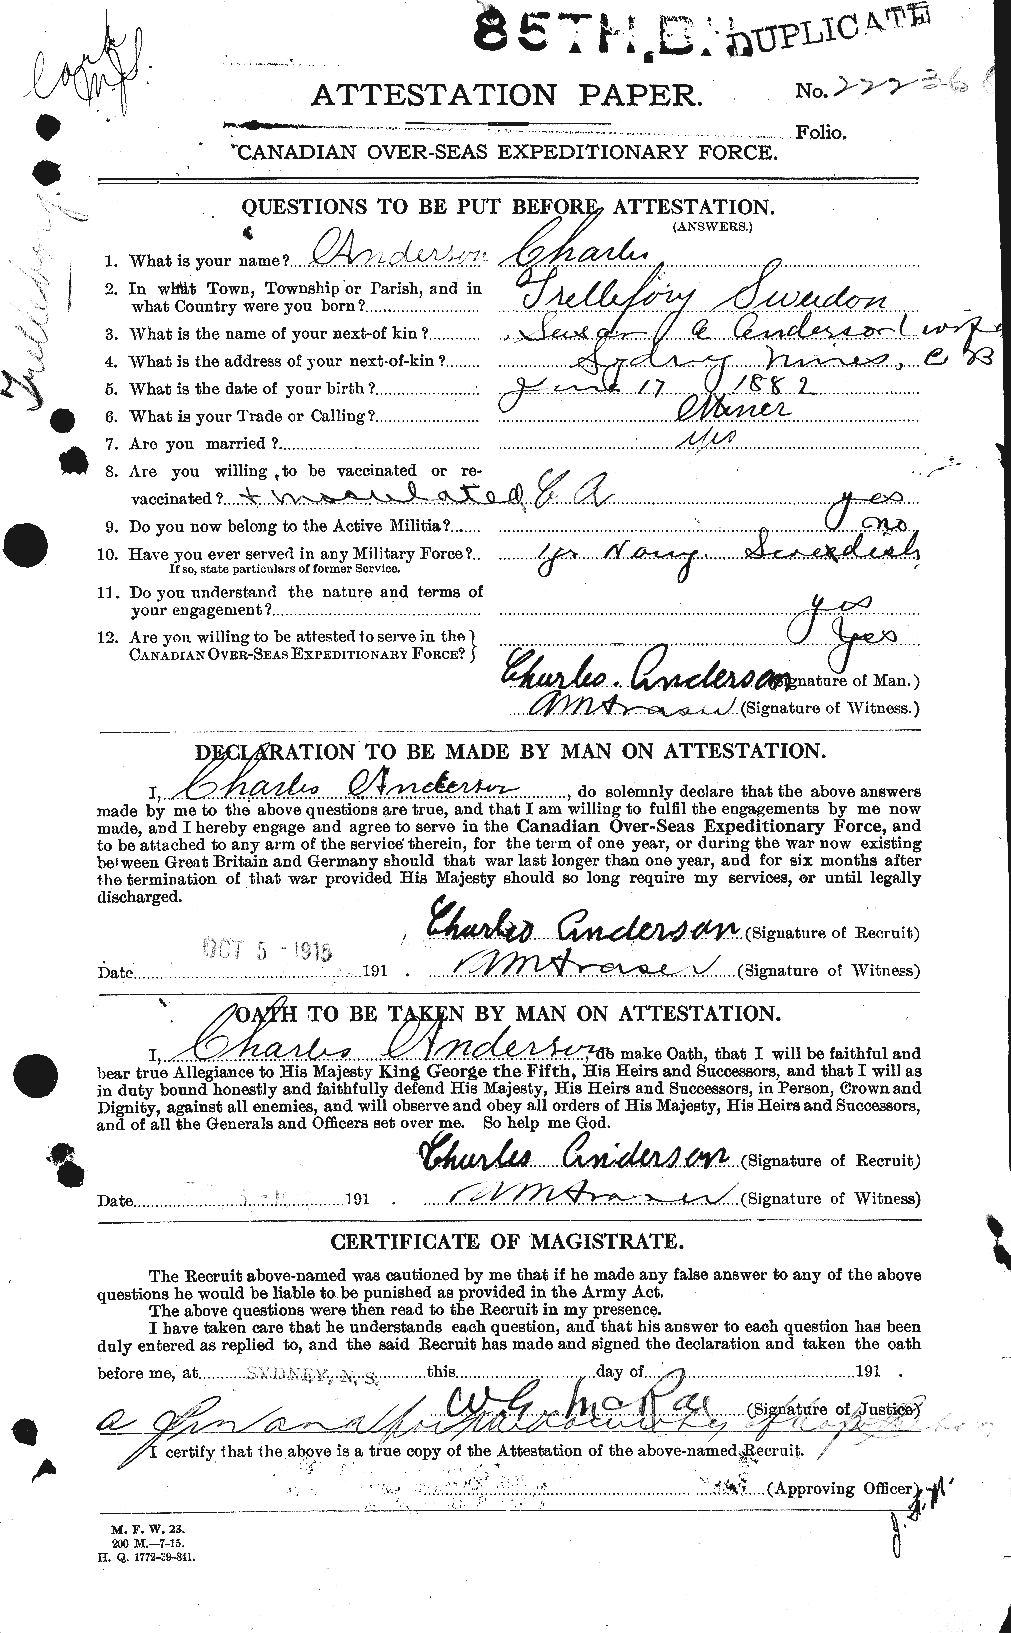 Personnel Records of the First World War - CEF 209254a